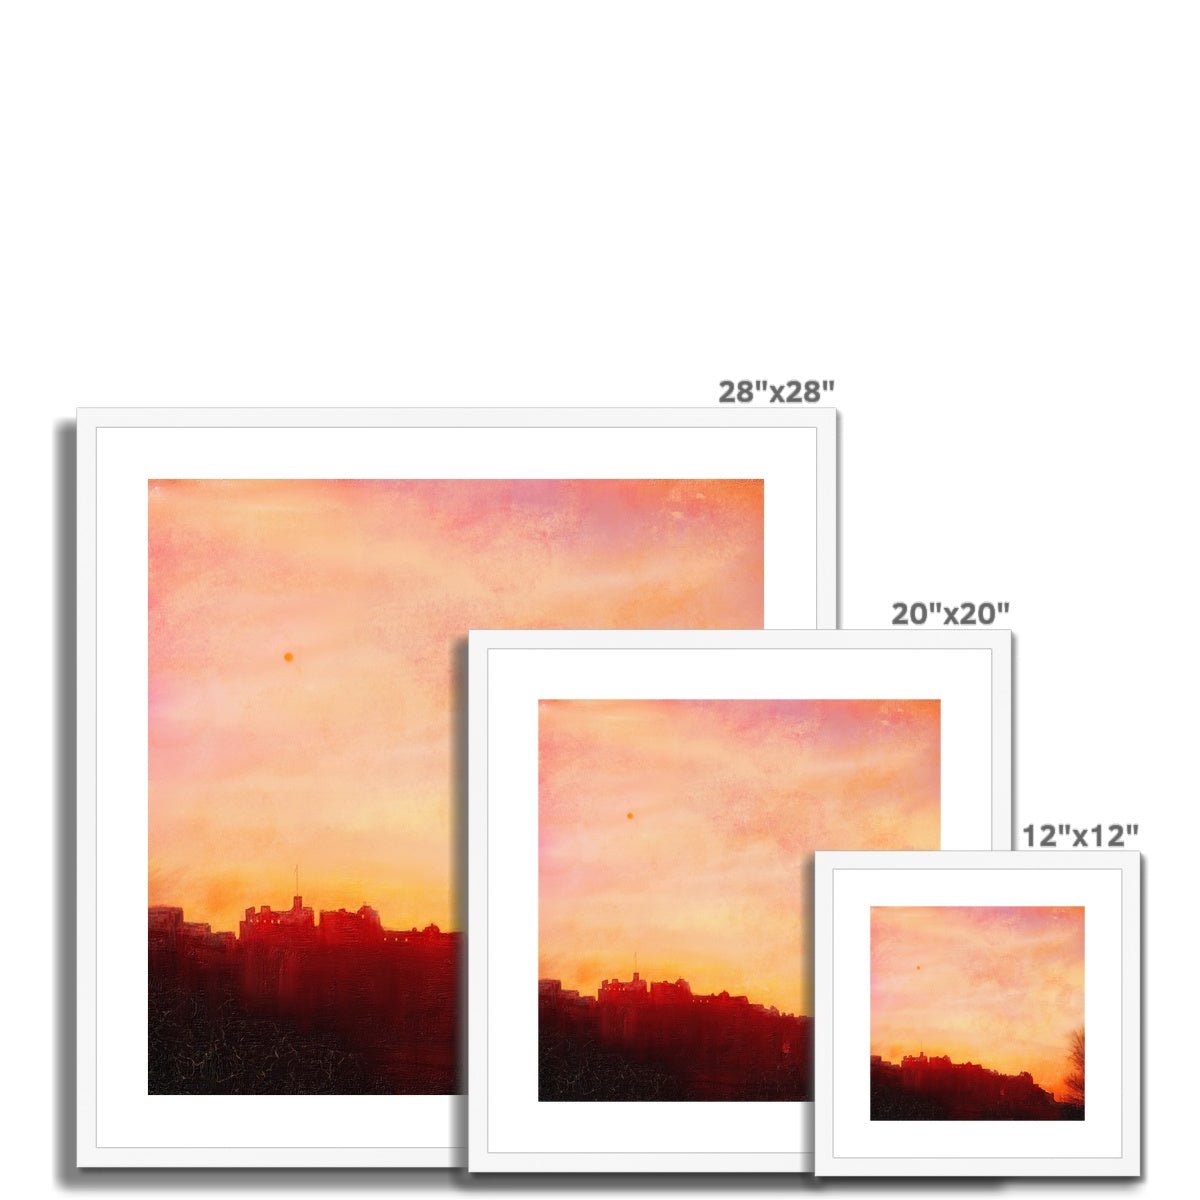 Edinburgh Castle Sunset Painting | Framed & Mounted Prints From Scotland-Framed & Mounted Prints-Historic & Iconic Scotland Art Gallery-Paintings, Prints, Homeware, Art Gifts From Scotland By Scottish Artist Kevin Hunter